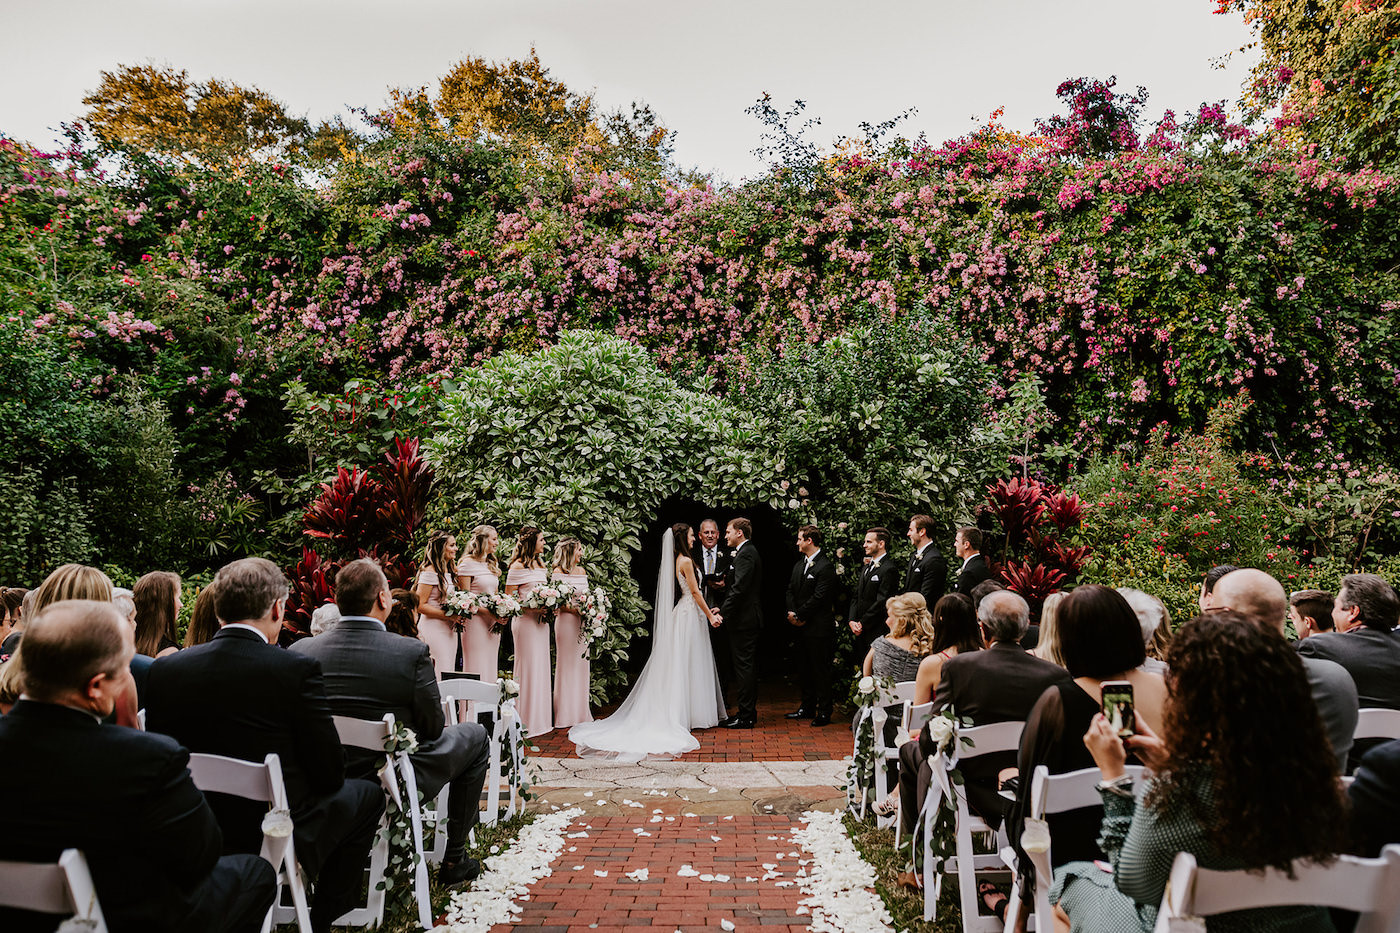 St. Petersburg Outdoor Garden Wedding Ceremony with Lush Covered Wall Backdrop | Blush Pink and White Wedding